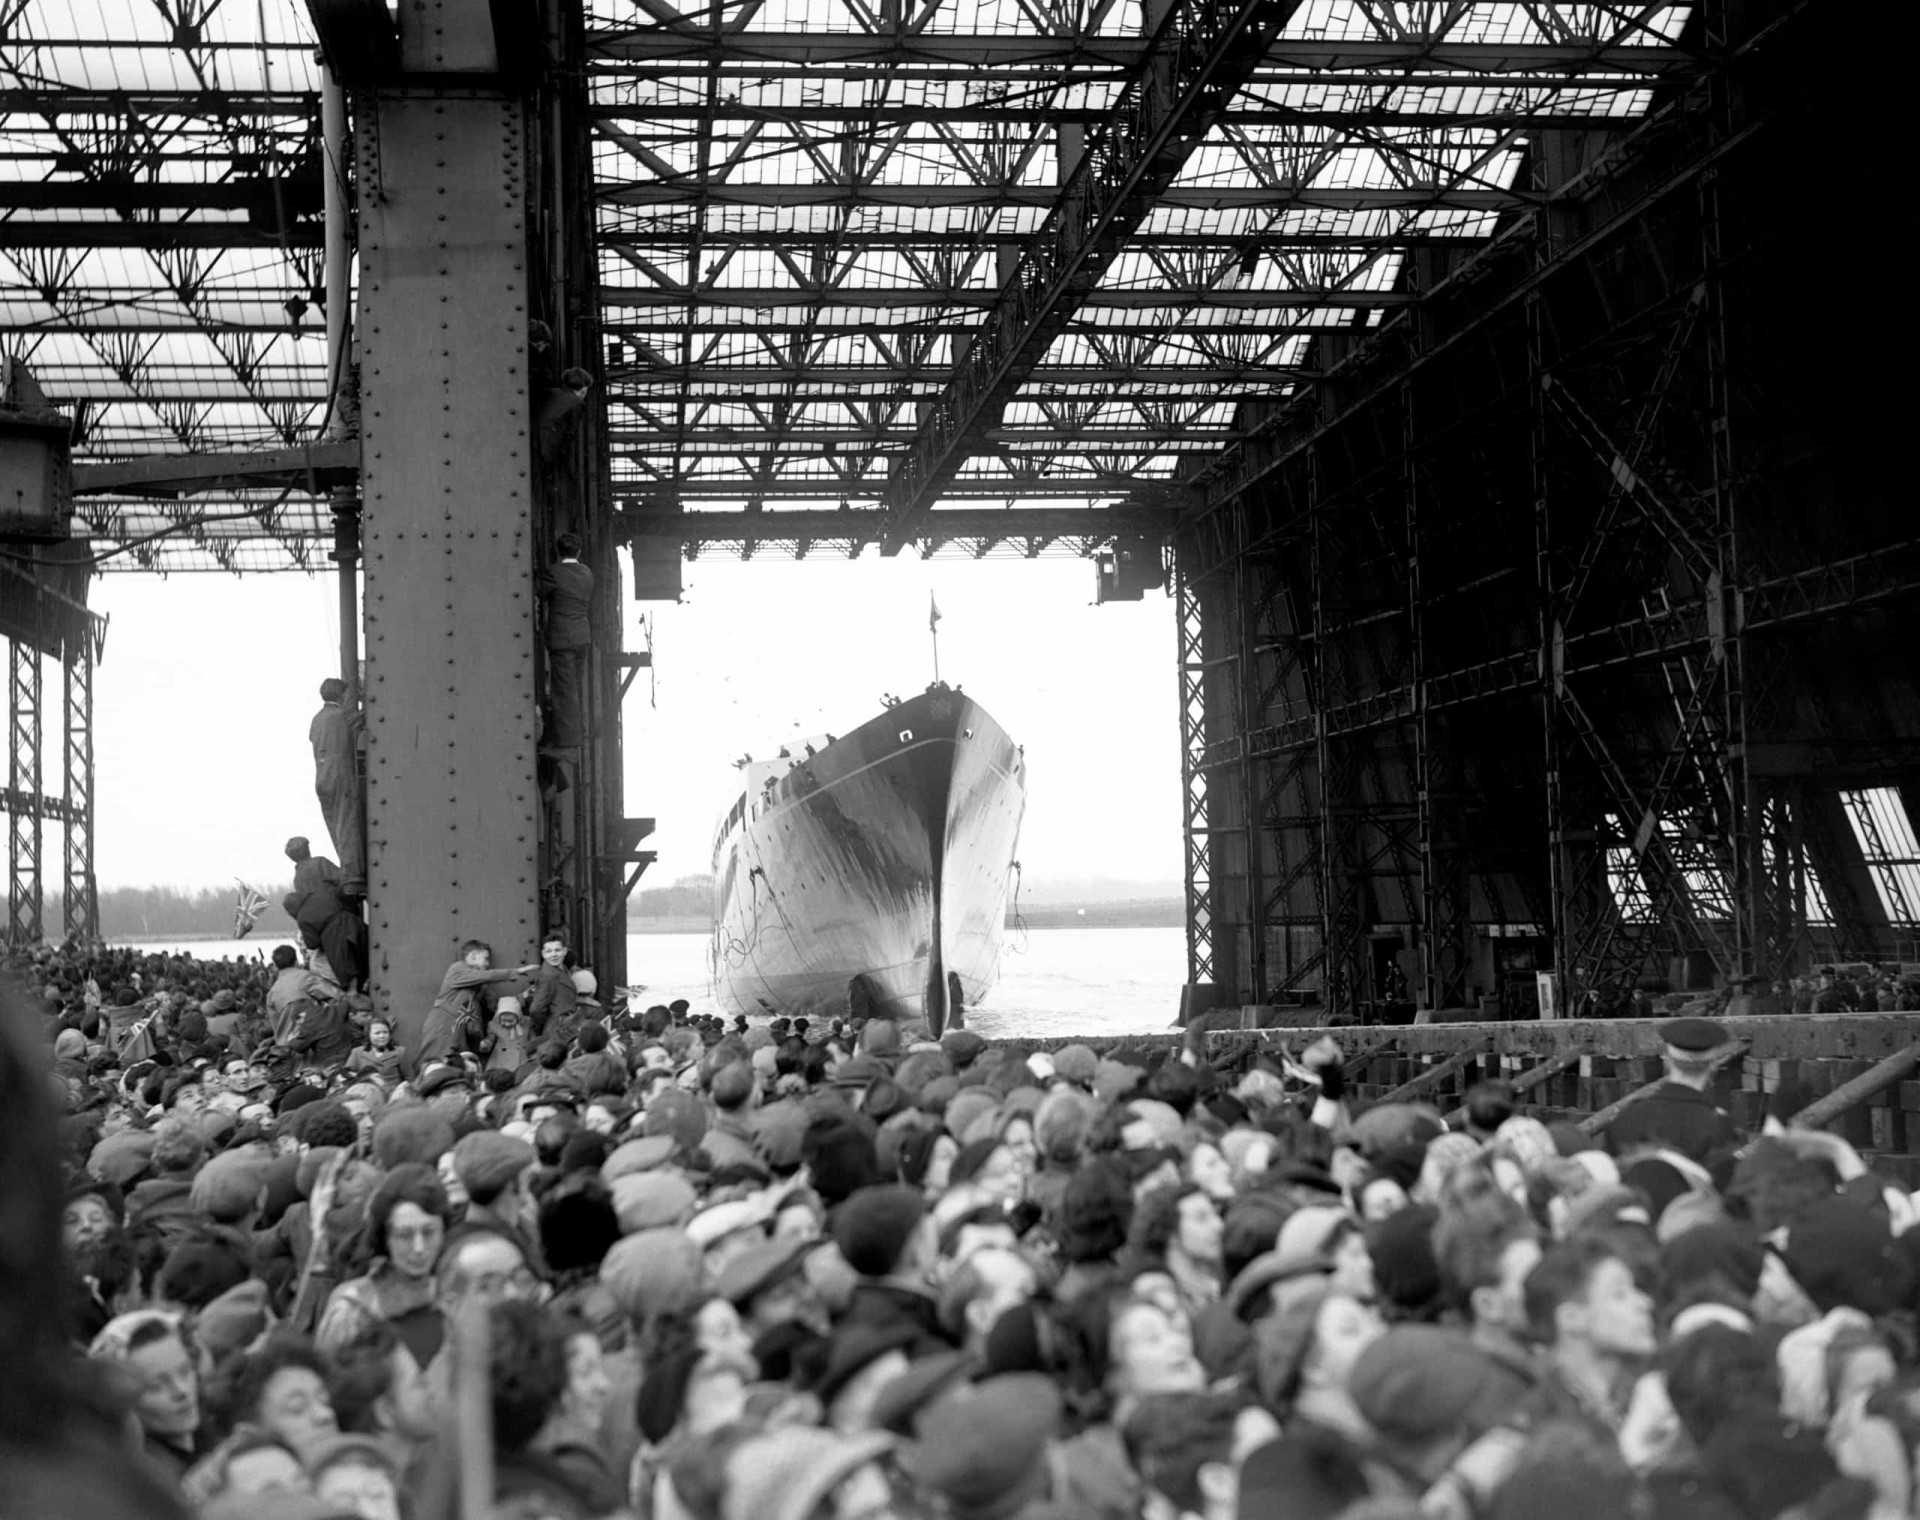 <p>The new Royal Yacht <em>Britannia</em> enters the water after her launch on April 16, 1953 by Queen Elizabeth II at John Brown's shipyard on Clydebank, Scotland. The 126-m (413-ft) <em>Britannia</em> was designed with three masts and could reach a seagoing cruising speed of 21 knots.</p><p>You may also like:<a href="https://www.starsinsider.com/n/179932?utm_source=msn.com&utm_medium=display&utm_campaign=referral_description&utm_content=474709v3en-sg"> Do you recognize these big TV stars from 10 years ago?</a></p>